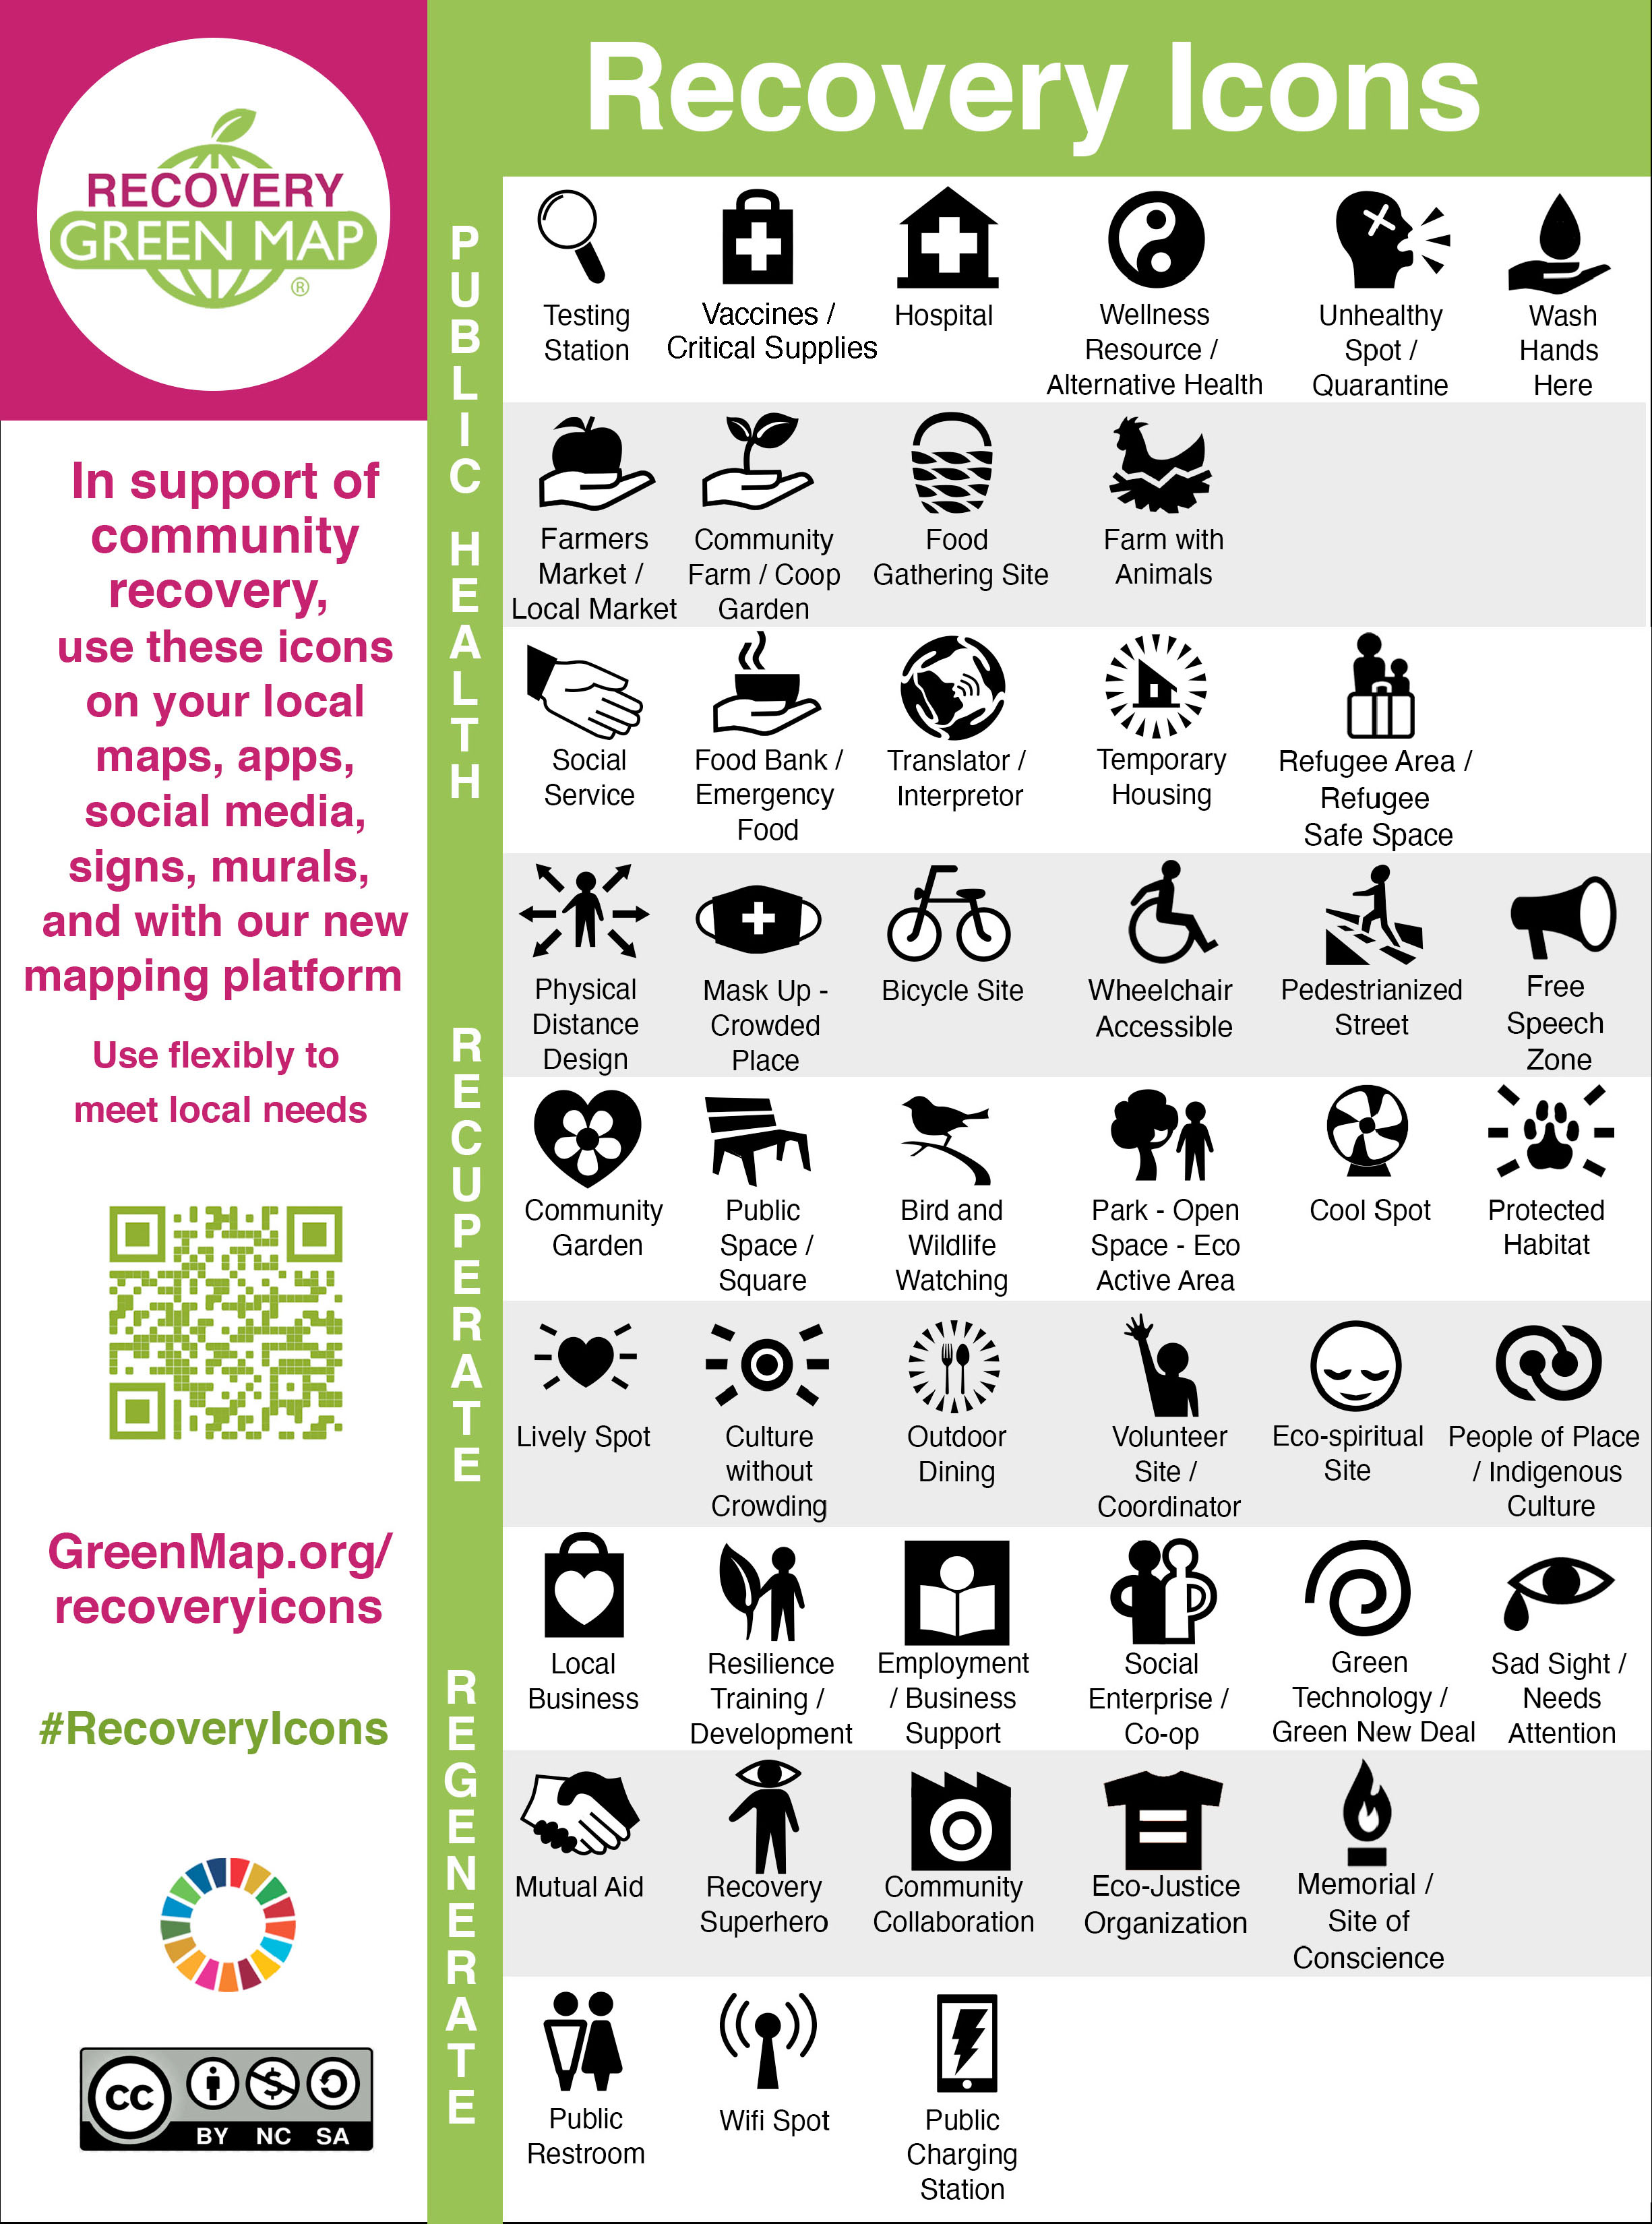 Recovery Icons - Green Map System - poster 2020